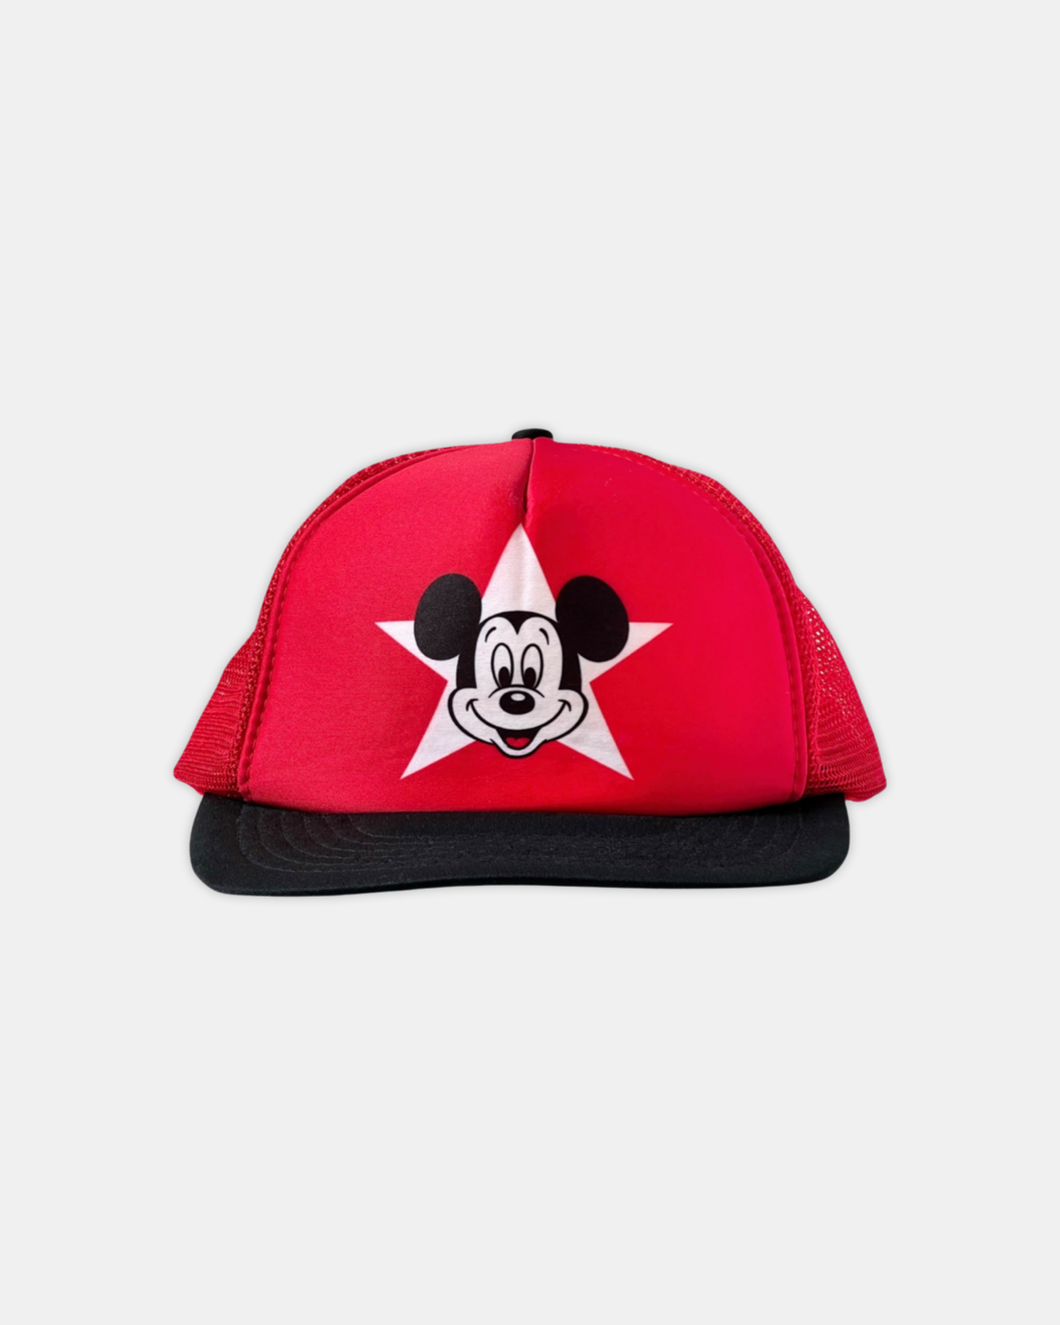 Vintage 1980s Mickey Mouse Trucker Hat